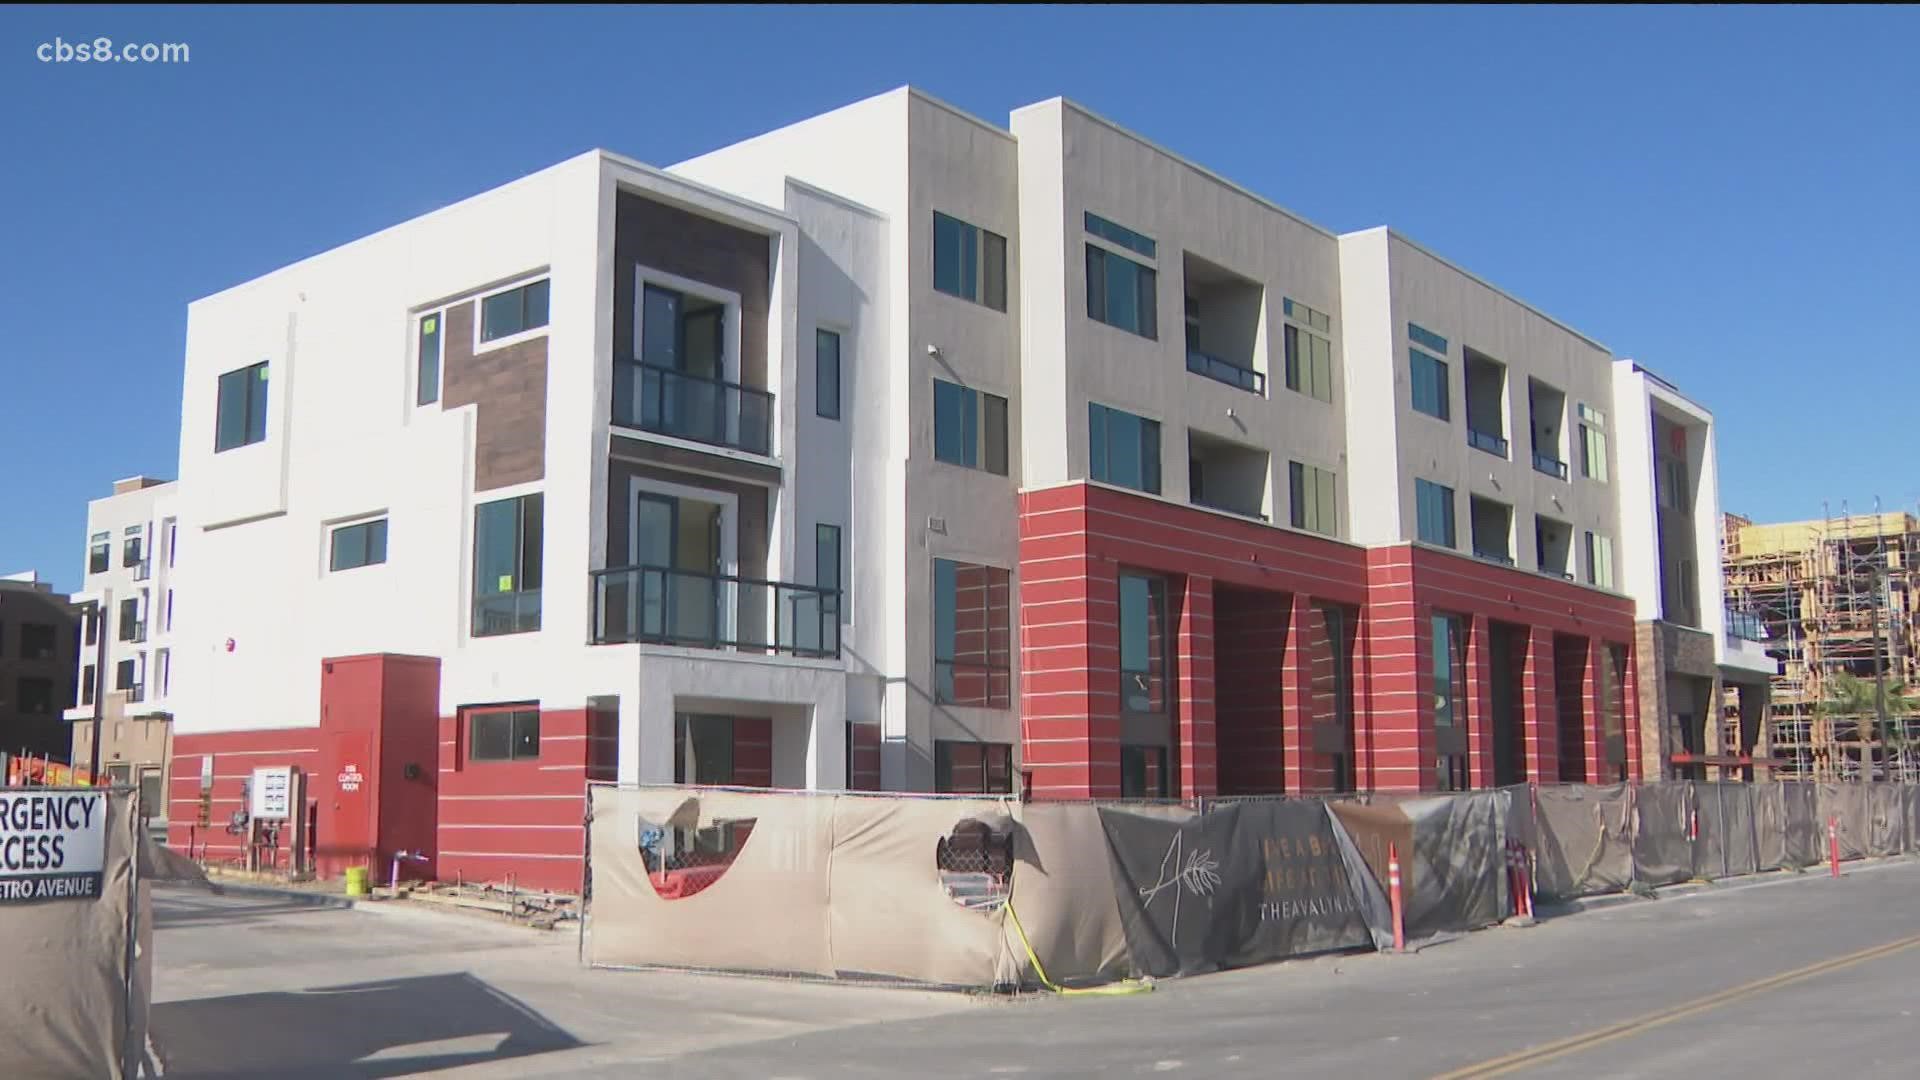 With low supply and high demand, it’s no surprise to see sky high rents around San Diego.